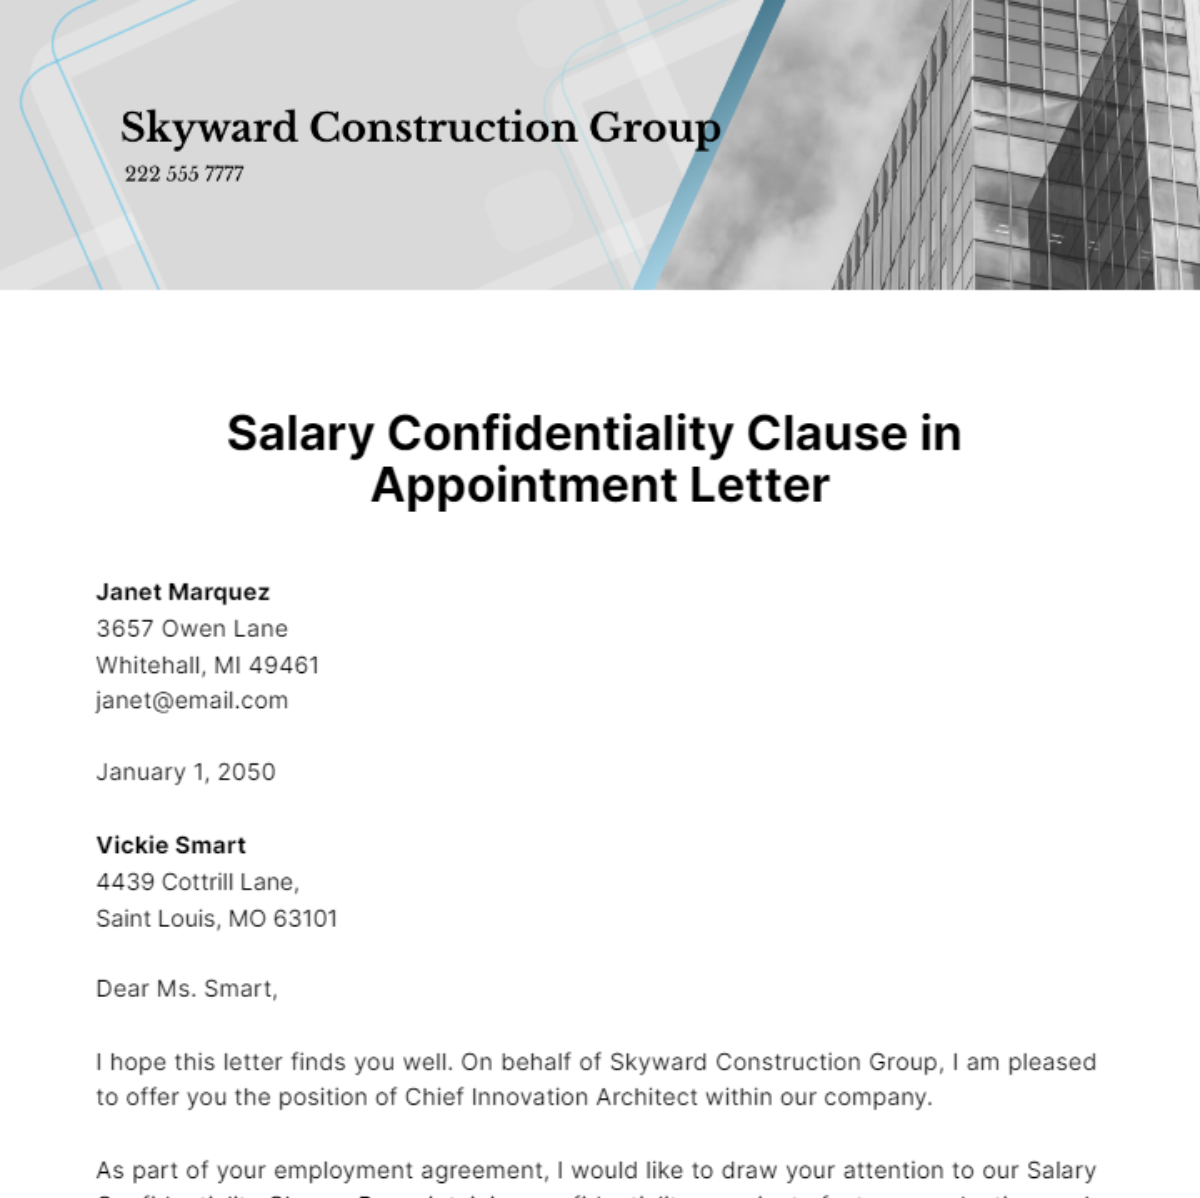 Free Salary Confidentiality Clause in Appointment Letter Template